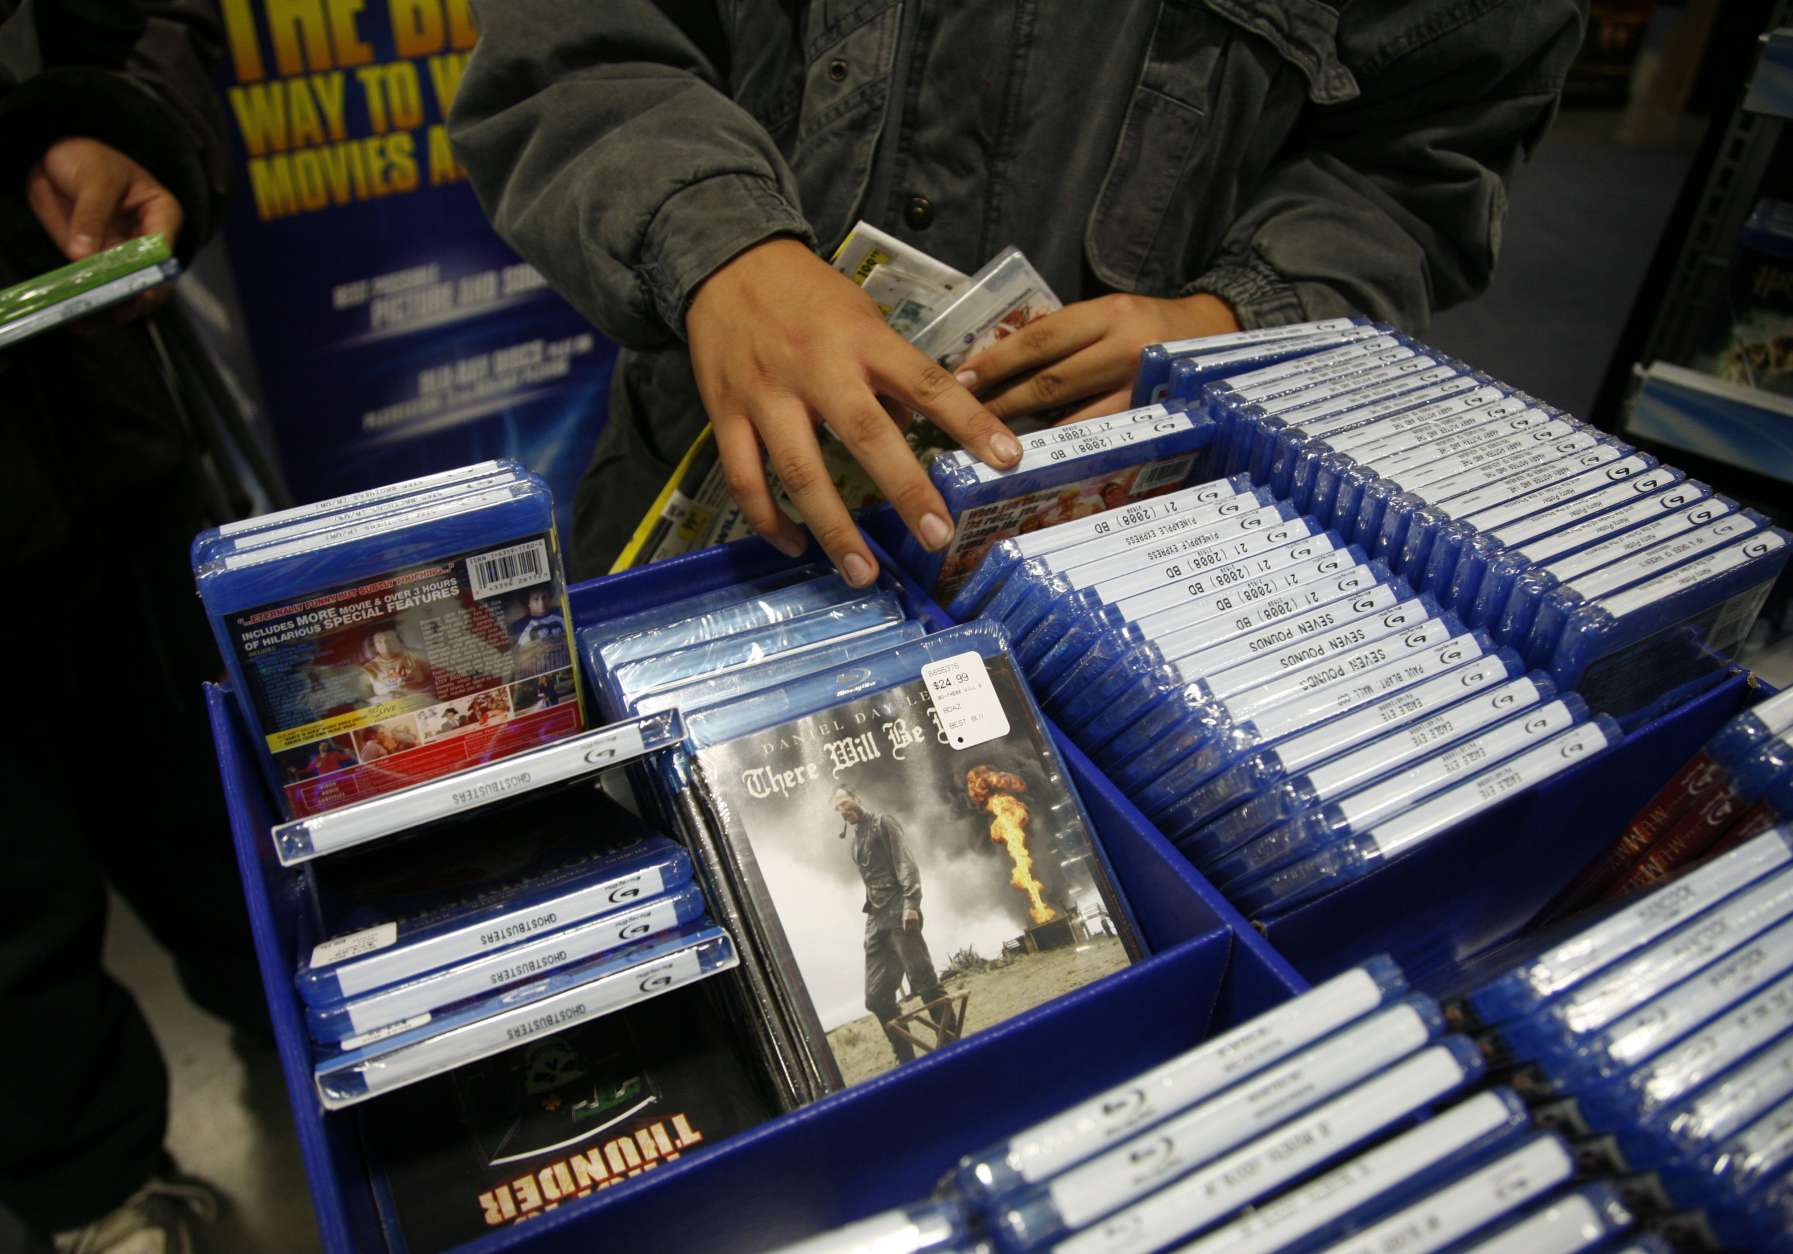 In this photo made Friday, Nov. 27, 2009, customers brows Blu-ray movies at Best Buy in West Hollywood, Calif. Although prices for some Blu-ray players dropped below $100 this holiday season, customers are hesitating to jump into the next-generation video format. (AP Photo/Jason Redmond)